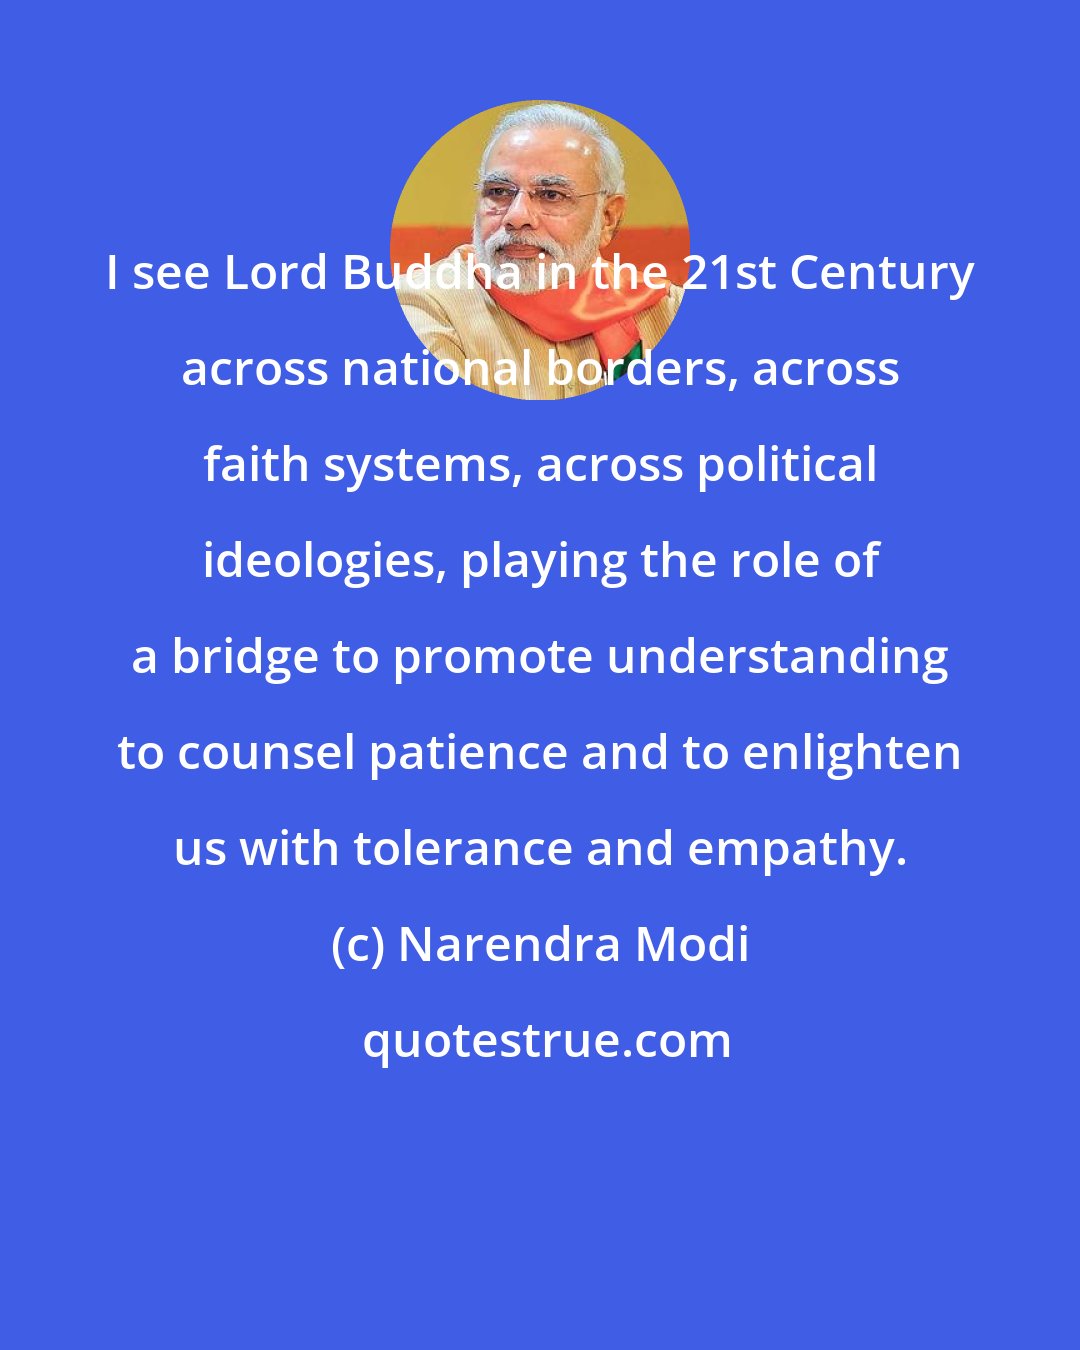 Narendra Modi: I see Lord Buddha in the 21st Century across national borders, across faith systems, across political ideologies, playing the role of a bridge to promote understanding to counsel patience and to enlighten us with tolerance and empathy.